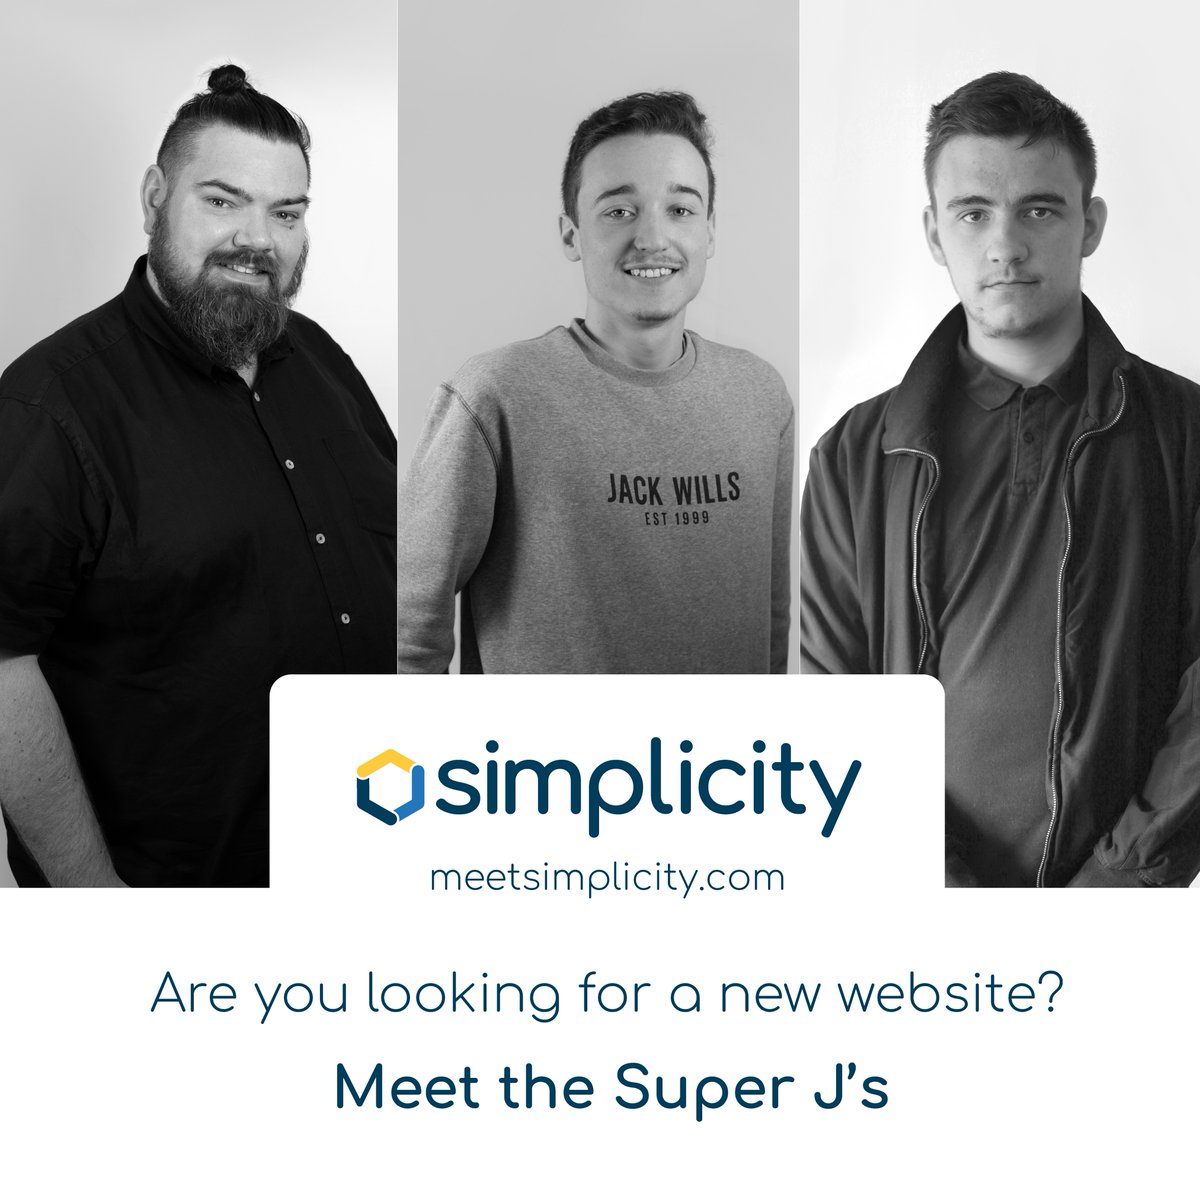 Meet the Super J’s: Our Trio of Code-Wizards! (James / Josh / Jack) 👨‍💻👨‍💻👨‍💻

Need a website rescue? Contact the team at Simplicity and let the Super J’s save the day! 💥🛠️'

#SuperJs #WebDevelopment #CodeHeroes